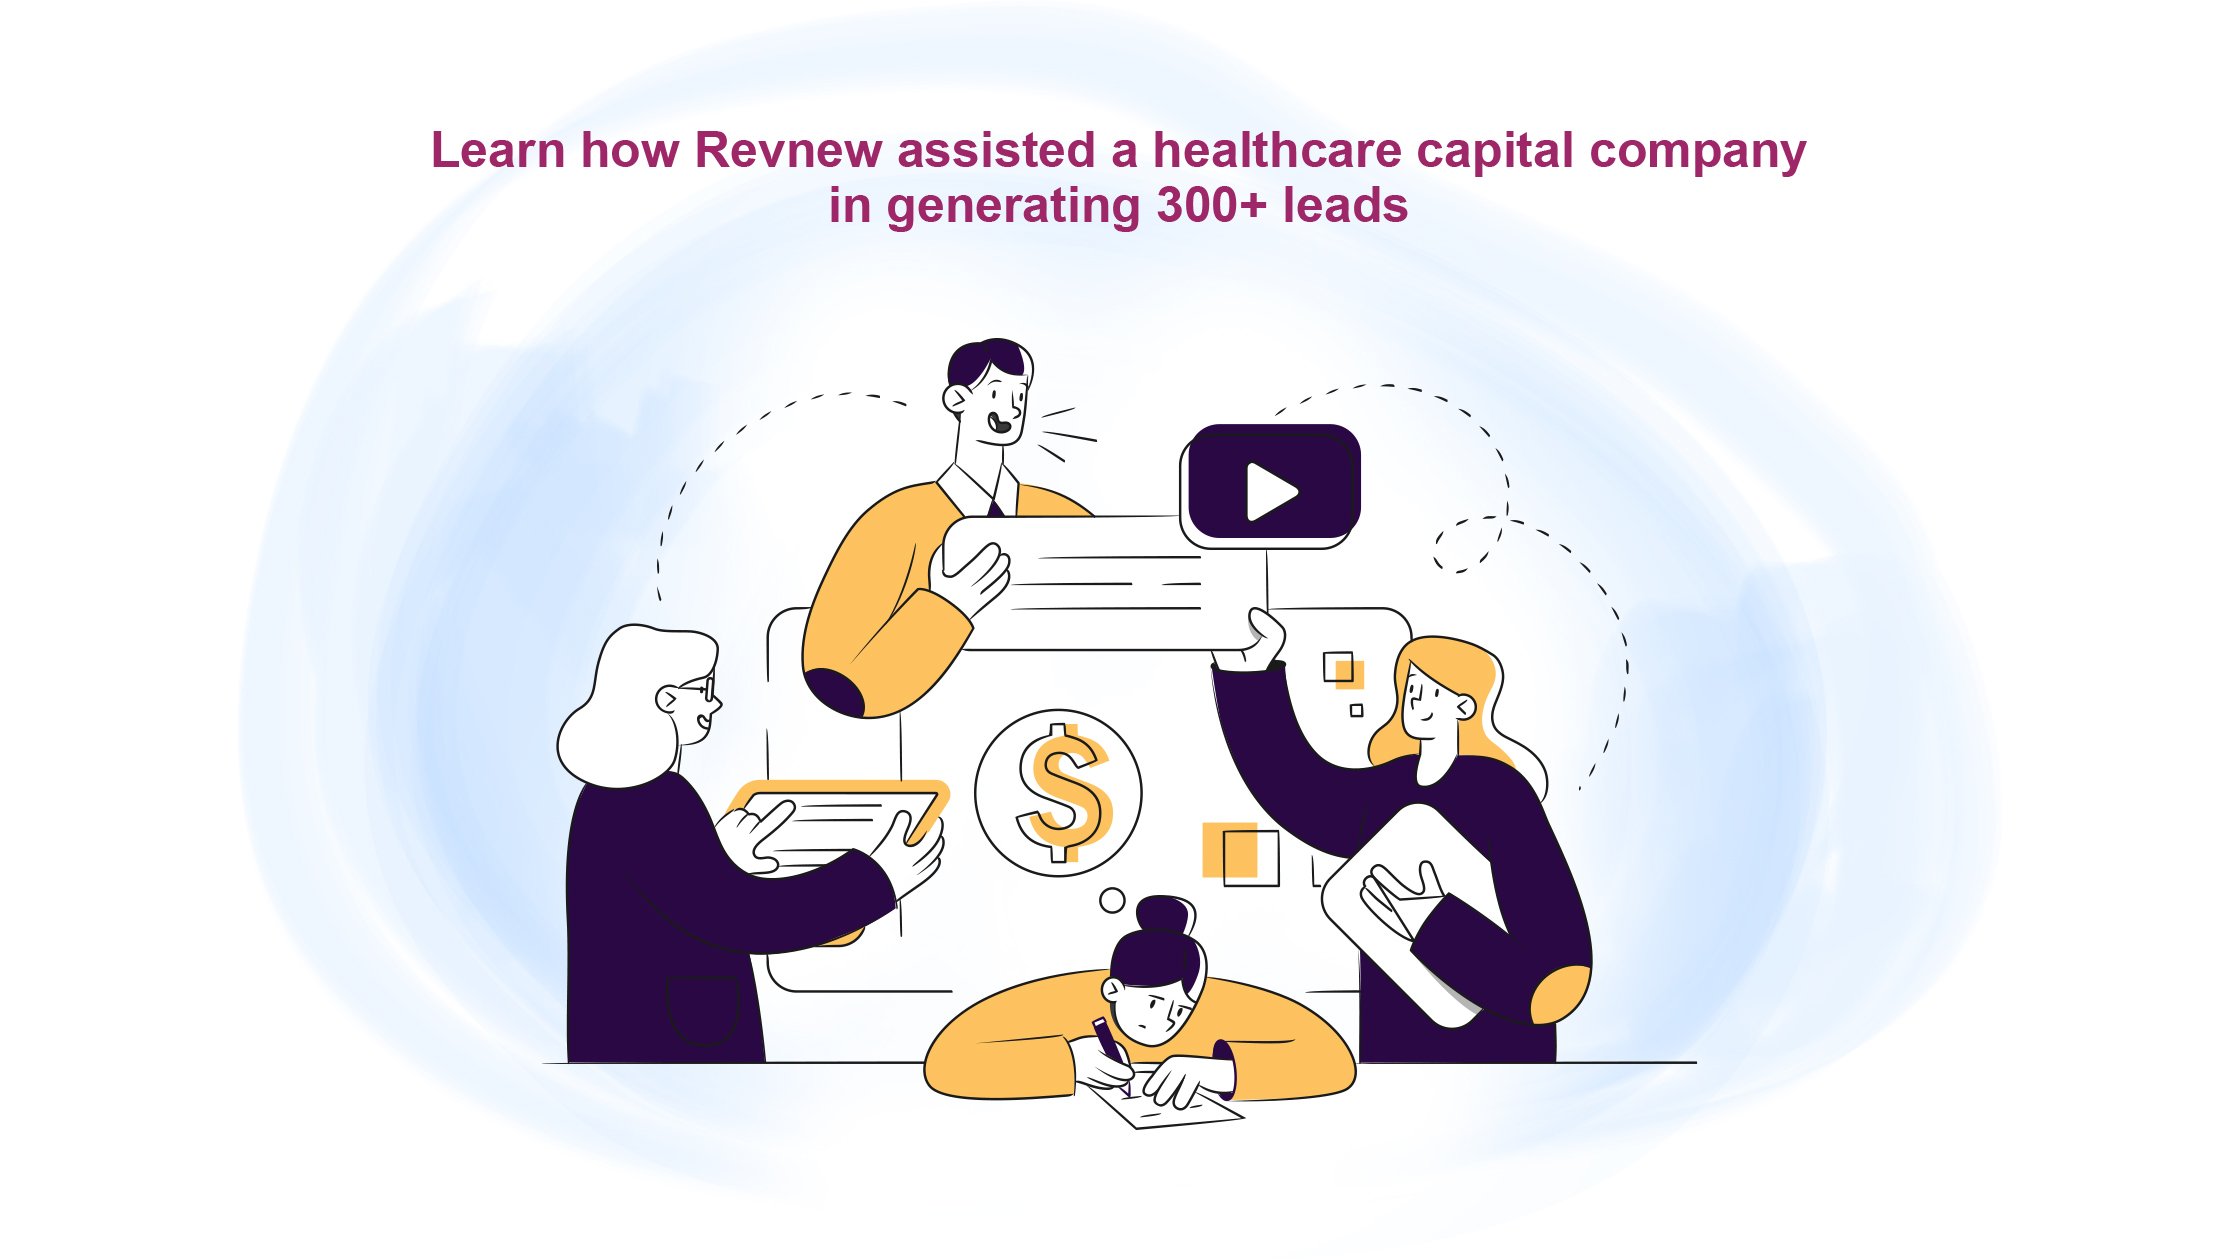 Learn-how-Revnew-assisted-a-healthcare-capital-company-in-generating-300-leads